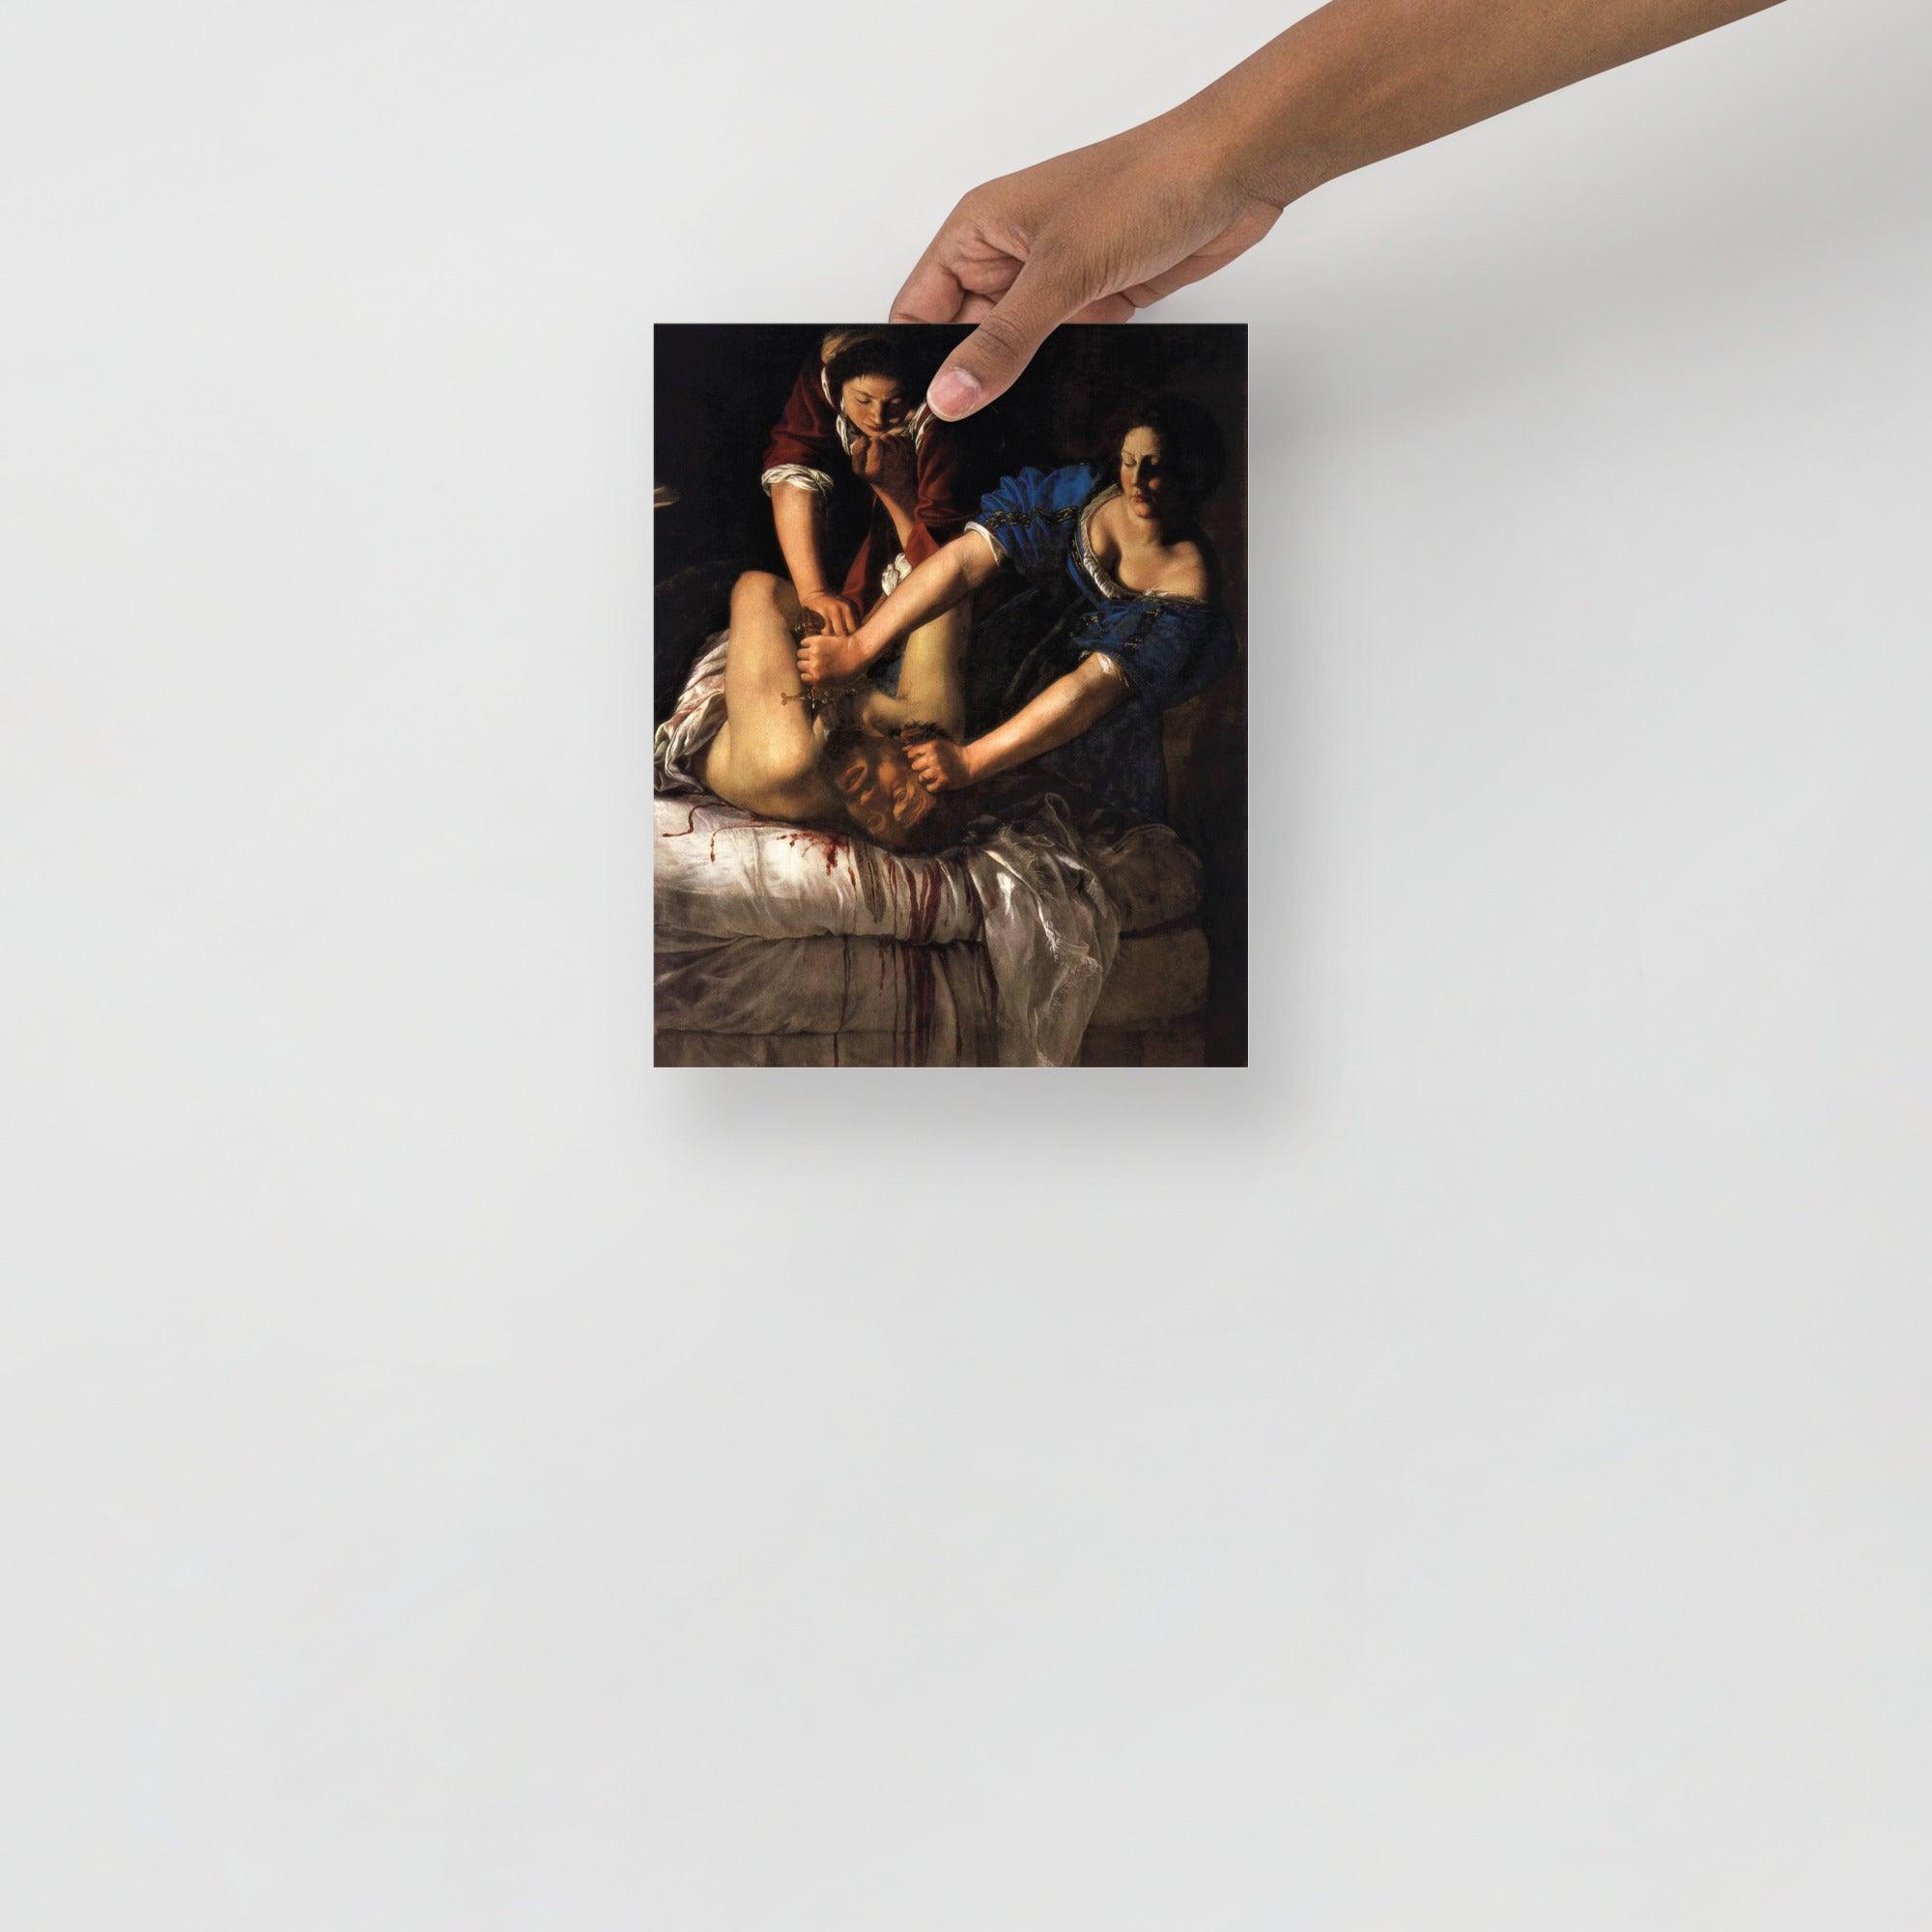 A Judith beheading Holofernes by Artemisia Gentileschi poster on a plain backdrop in size 8x10”.